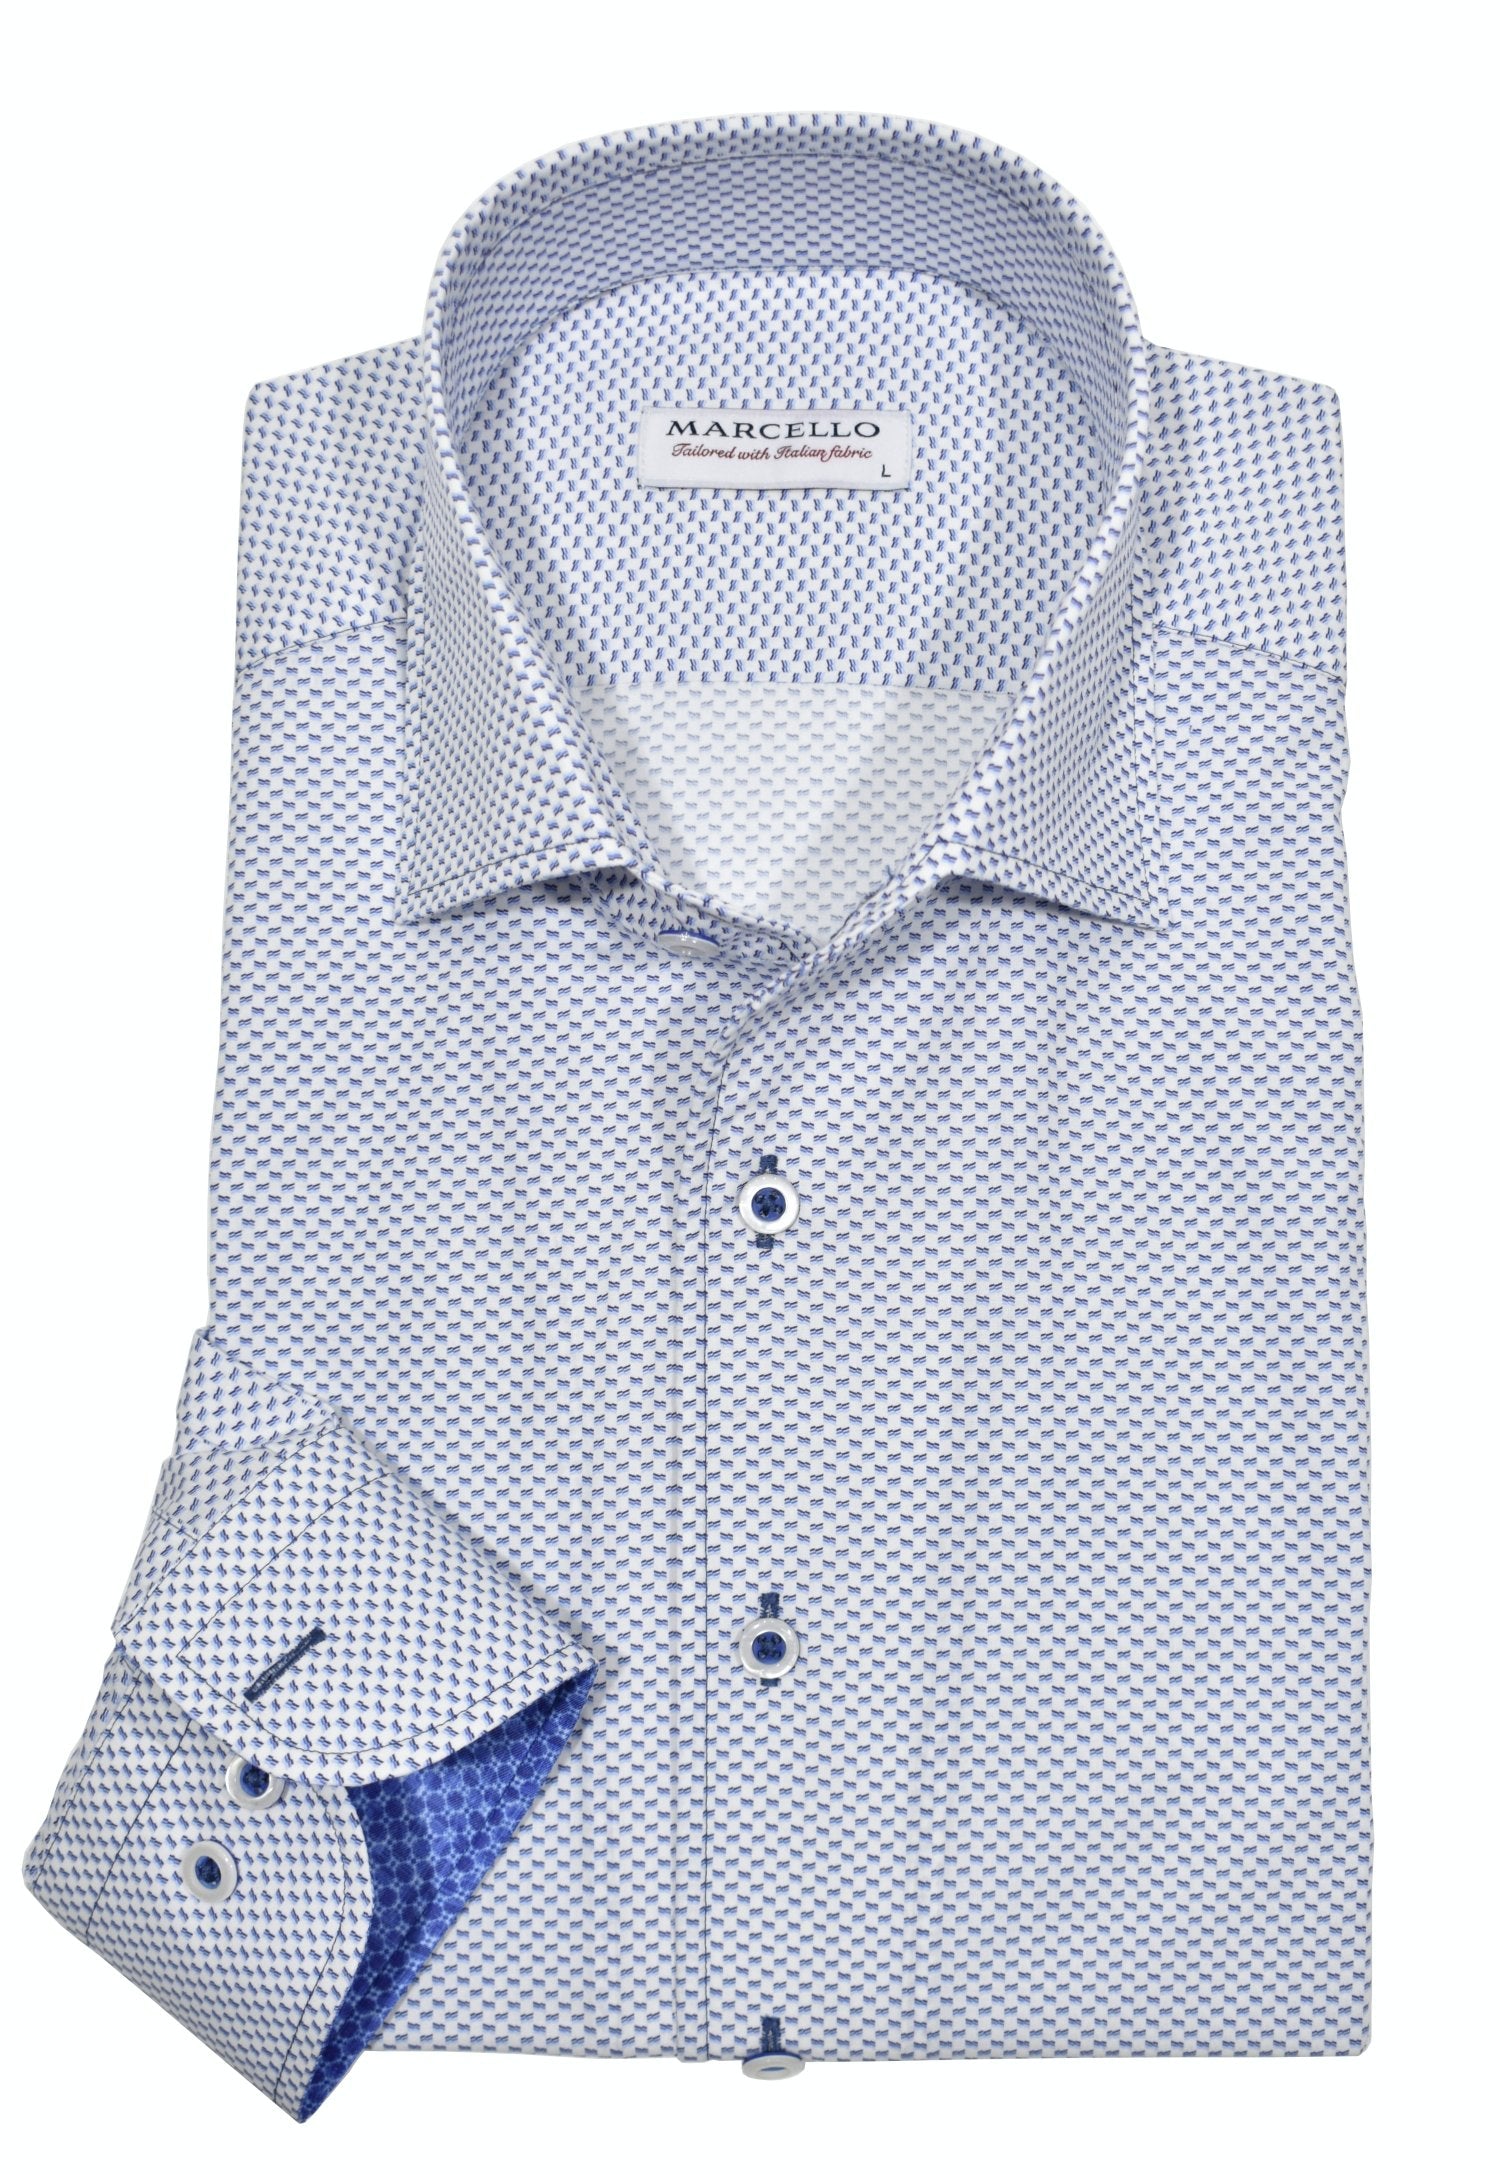 Rich. Elegant. A Must Have. Featuring a Marcello exclusive one piece roll collar, this medium blue and navy neat patterned shirt is classic in nature, but exudes a fashion sense. Fantastic worn alone with pant or jeans or excellent under a sport coat. By Marcello